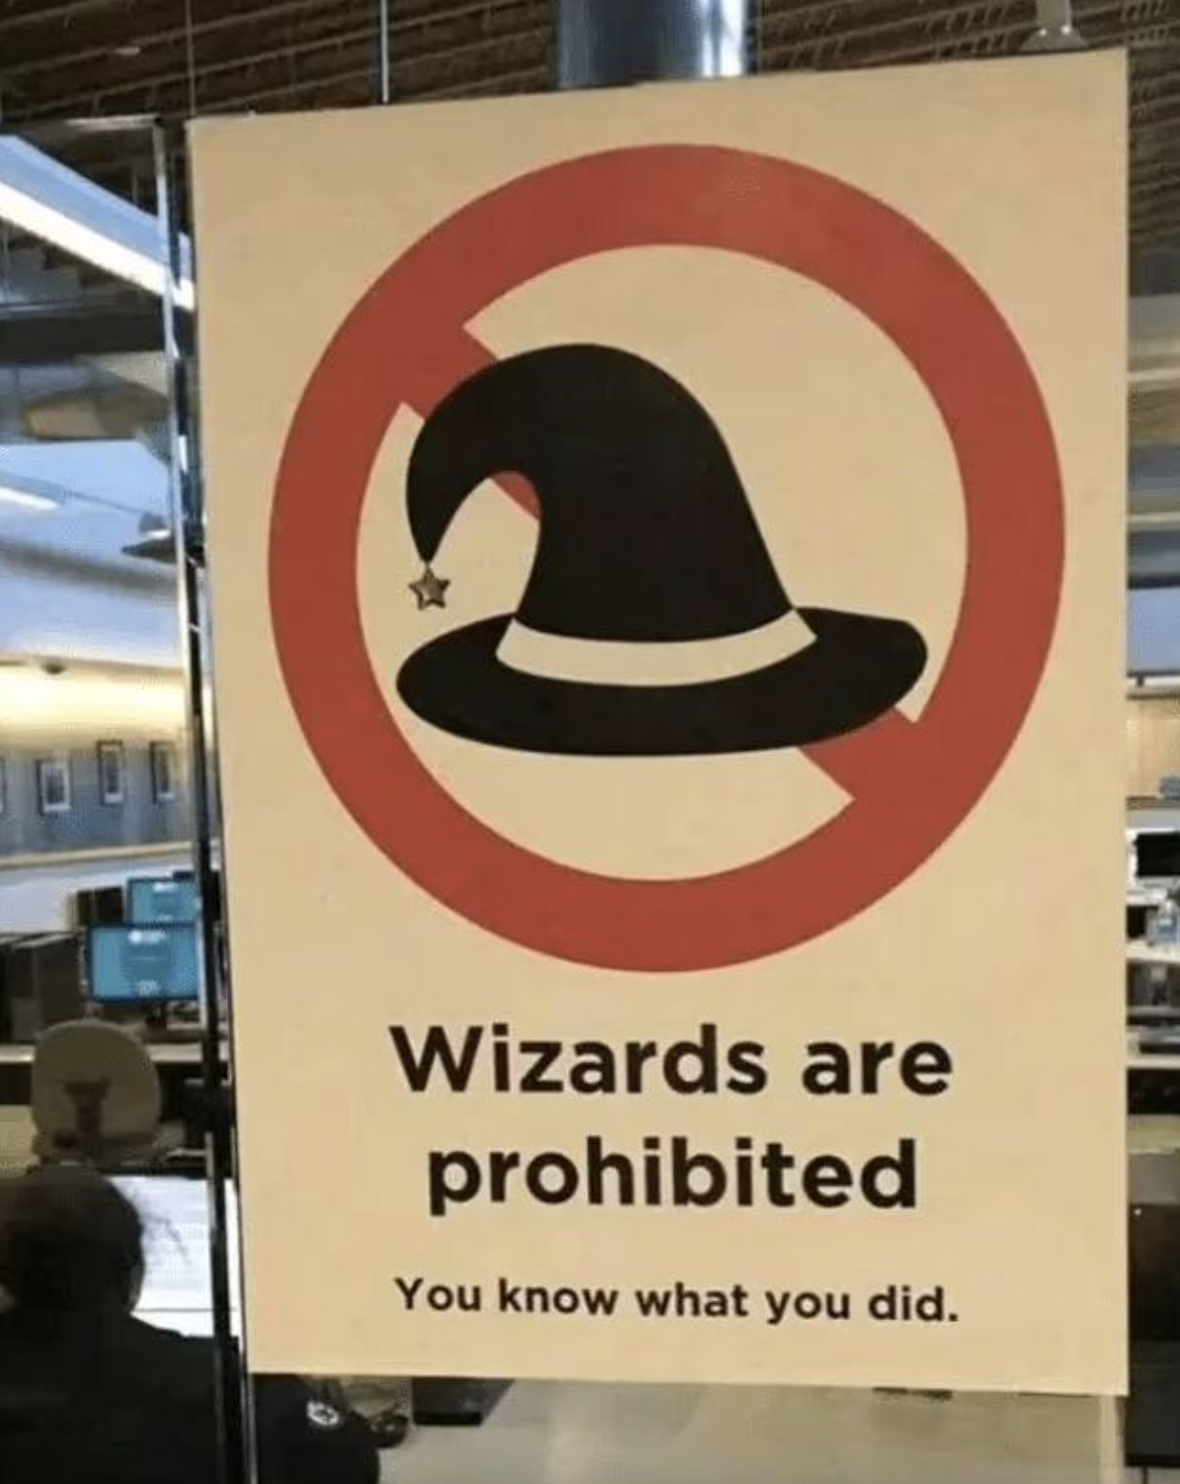 Sign saying &quot;Wizards are prohibited - You know what you did&quot; with a wizard hat in a prohibition circle